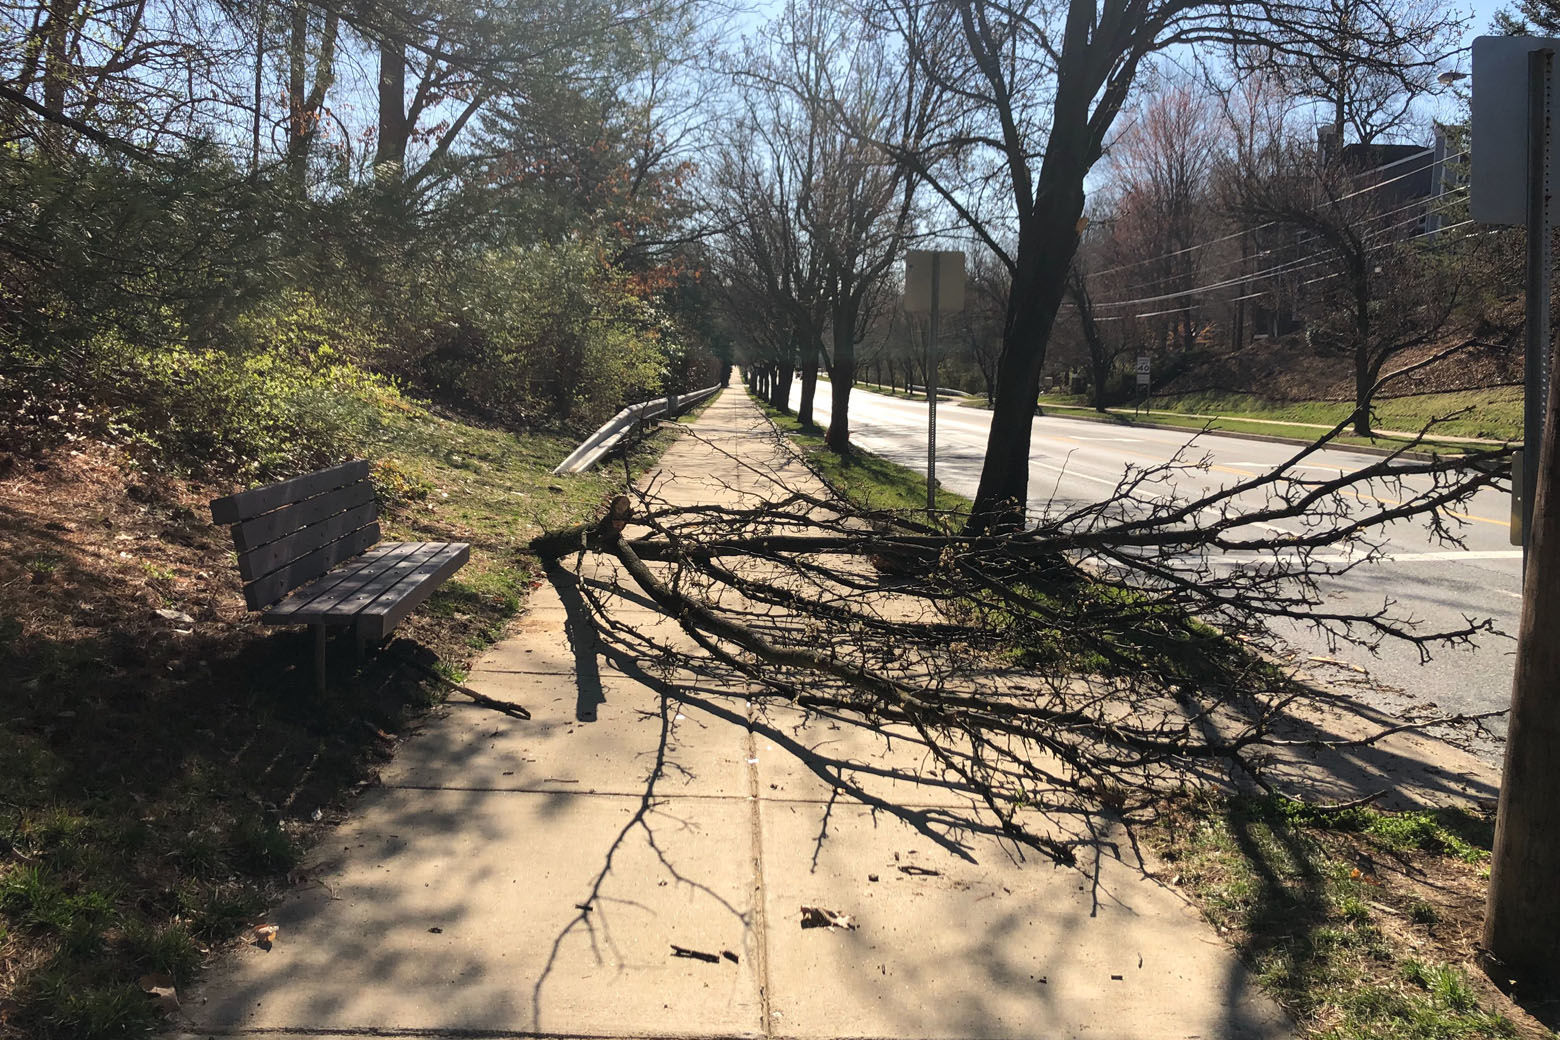 A person walking in North Bethesda, Maryland, was seriously injured Tuesday morning by a falling tree branch. (WTOP/Melissa Howell)